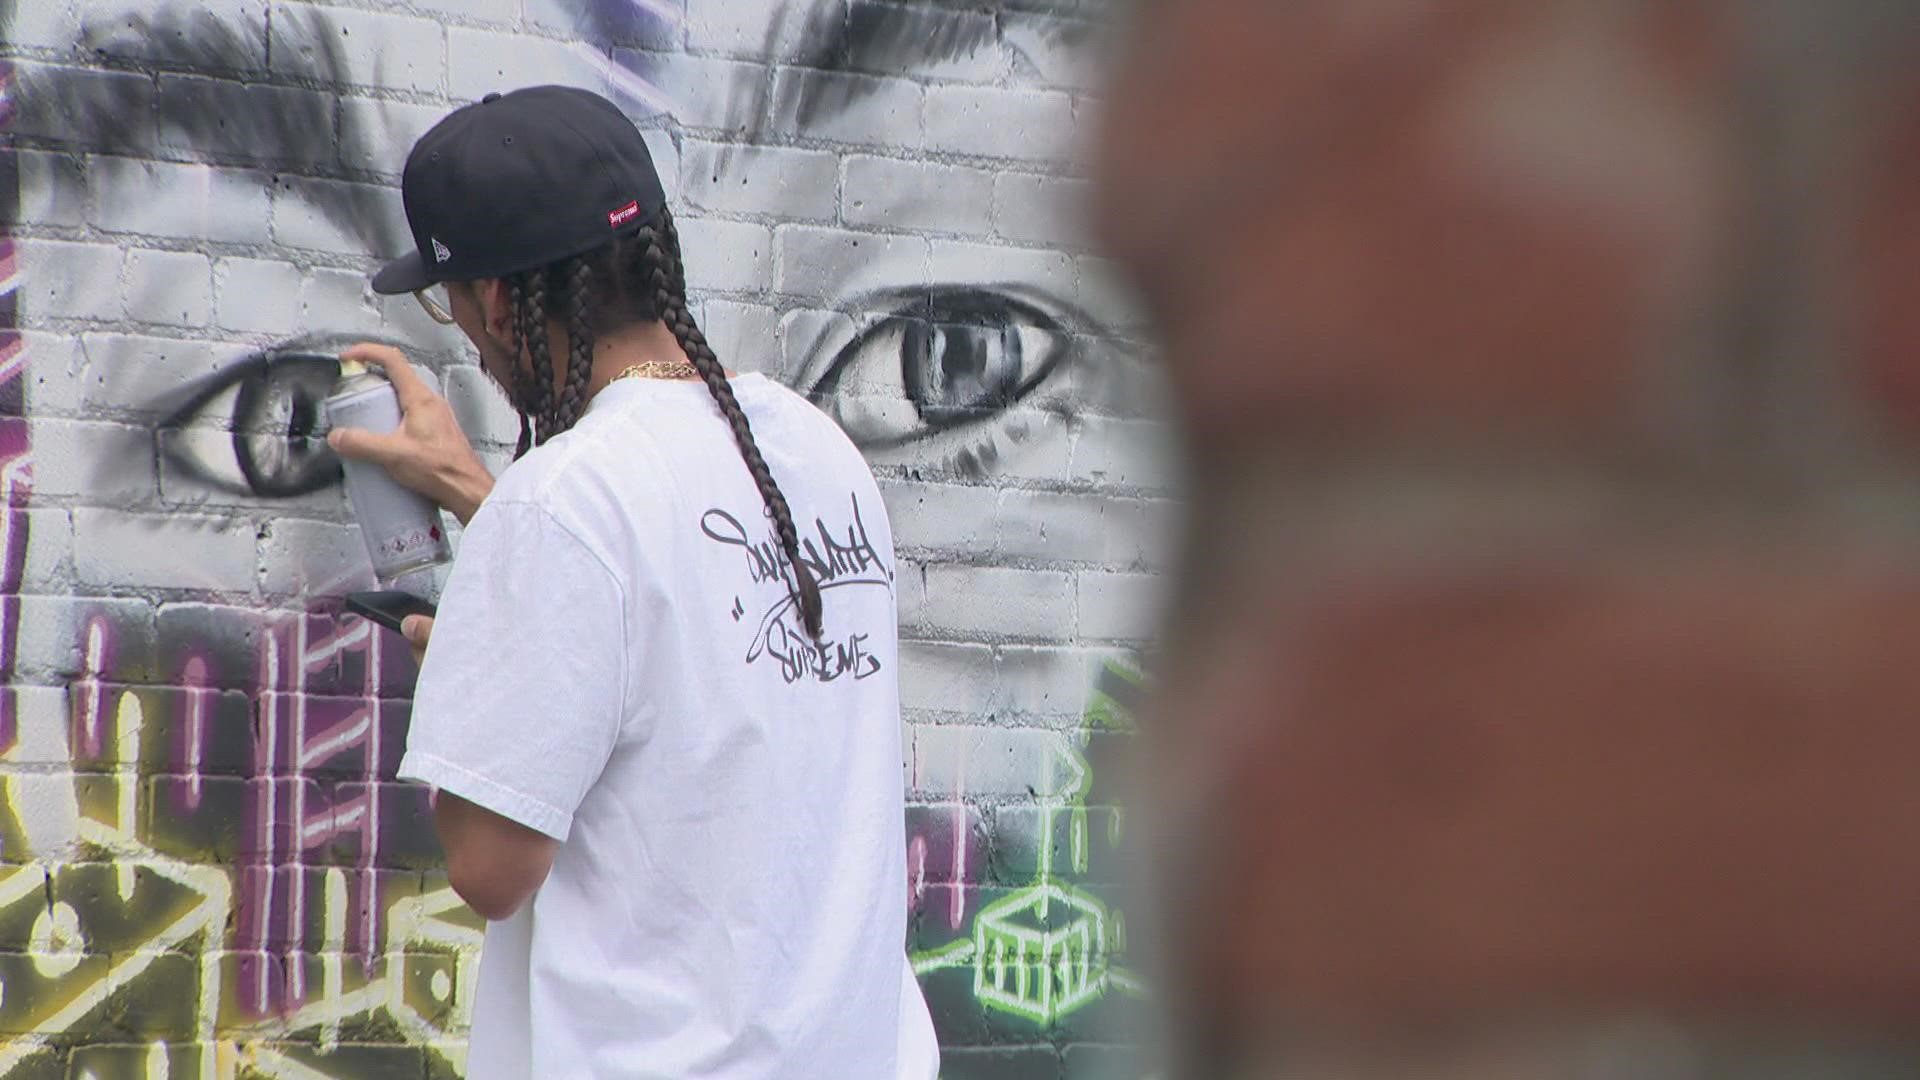 Police said Andy Billinger was shot to death last year over a gaming console. Denver street artist Chris Haven began work Wednesday on a mural to honor his friend.